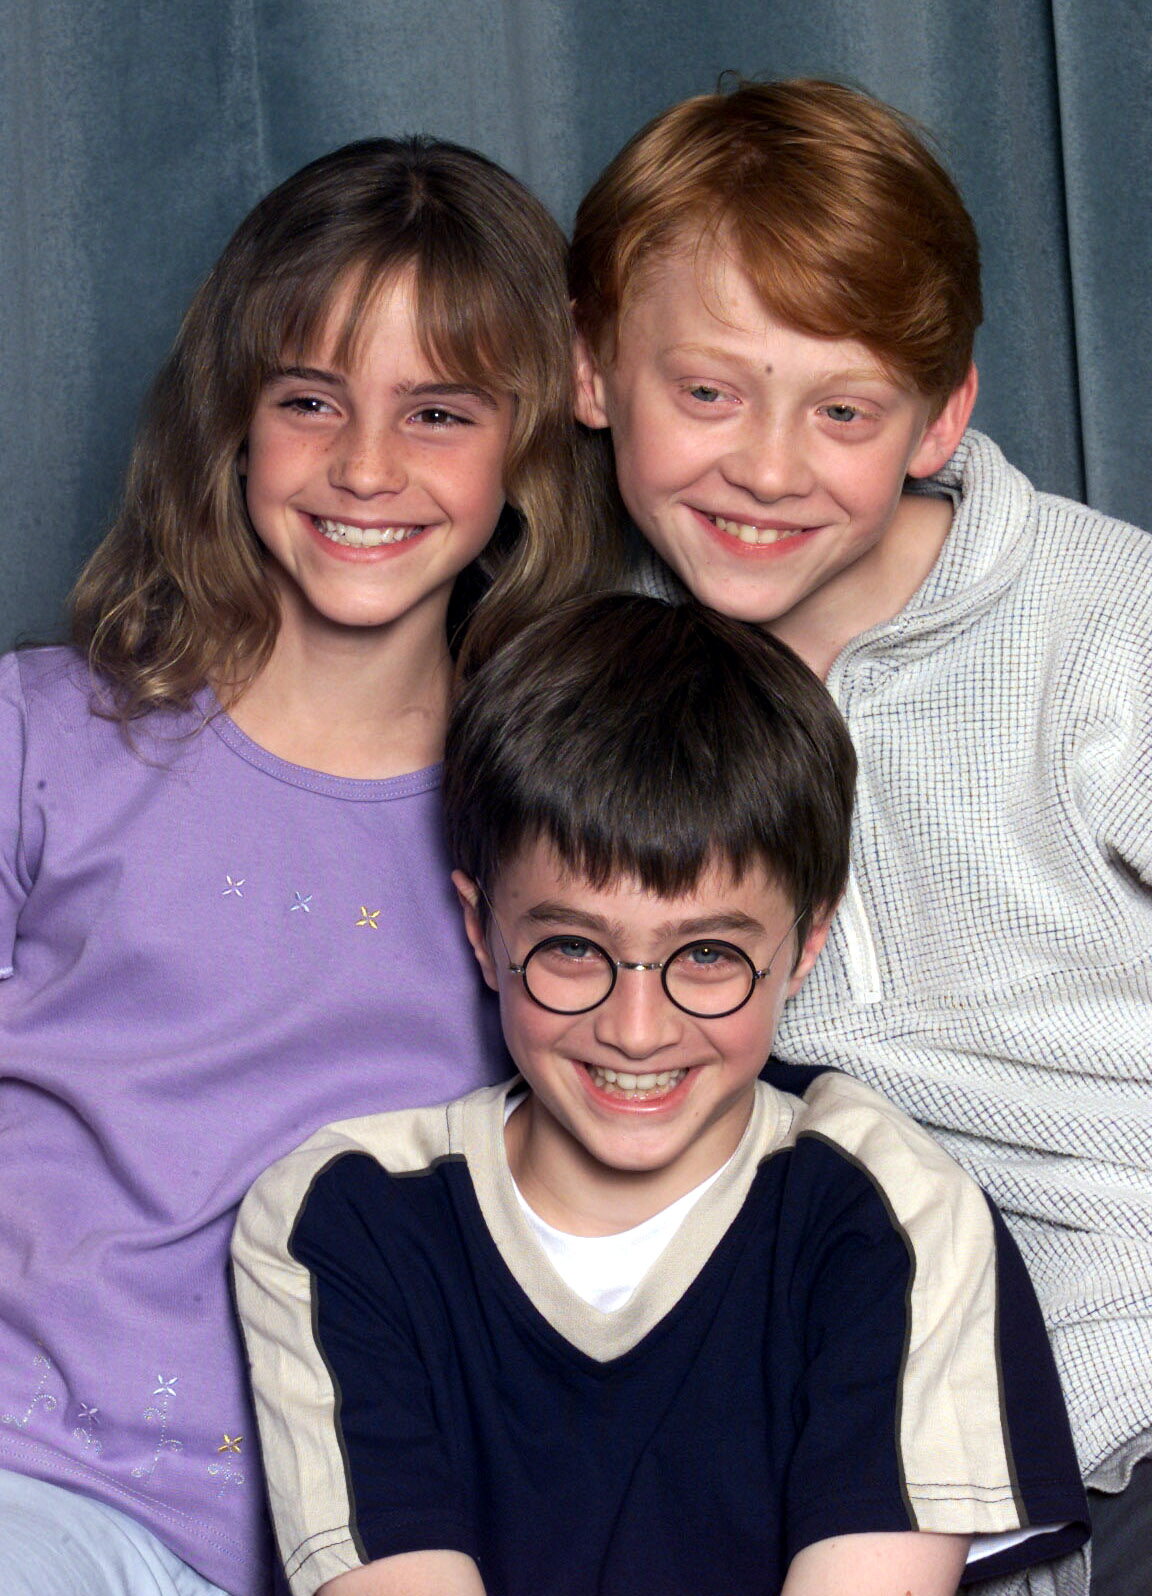 Emma Watson, Rupert Grint, and the boy at a press conference for the movie "Harry Potter and The Philosopher's Stone" in London on August 23, 2000 | Source: Getty Images